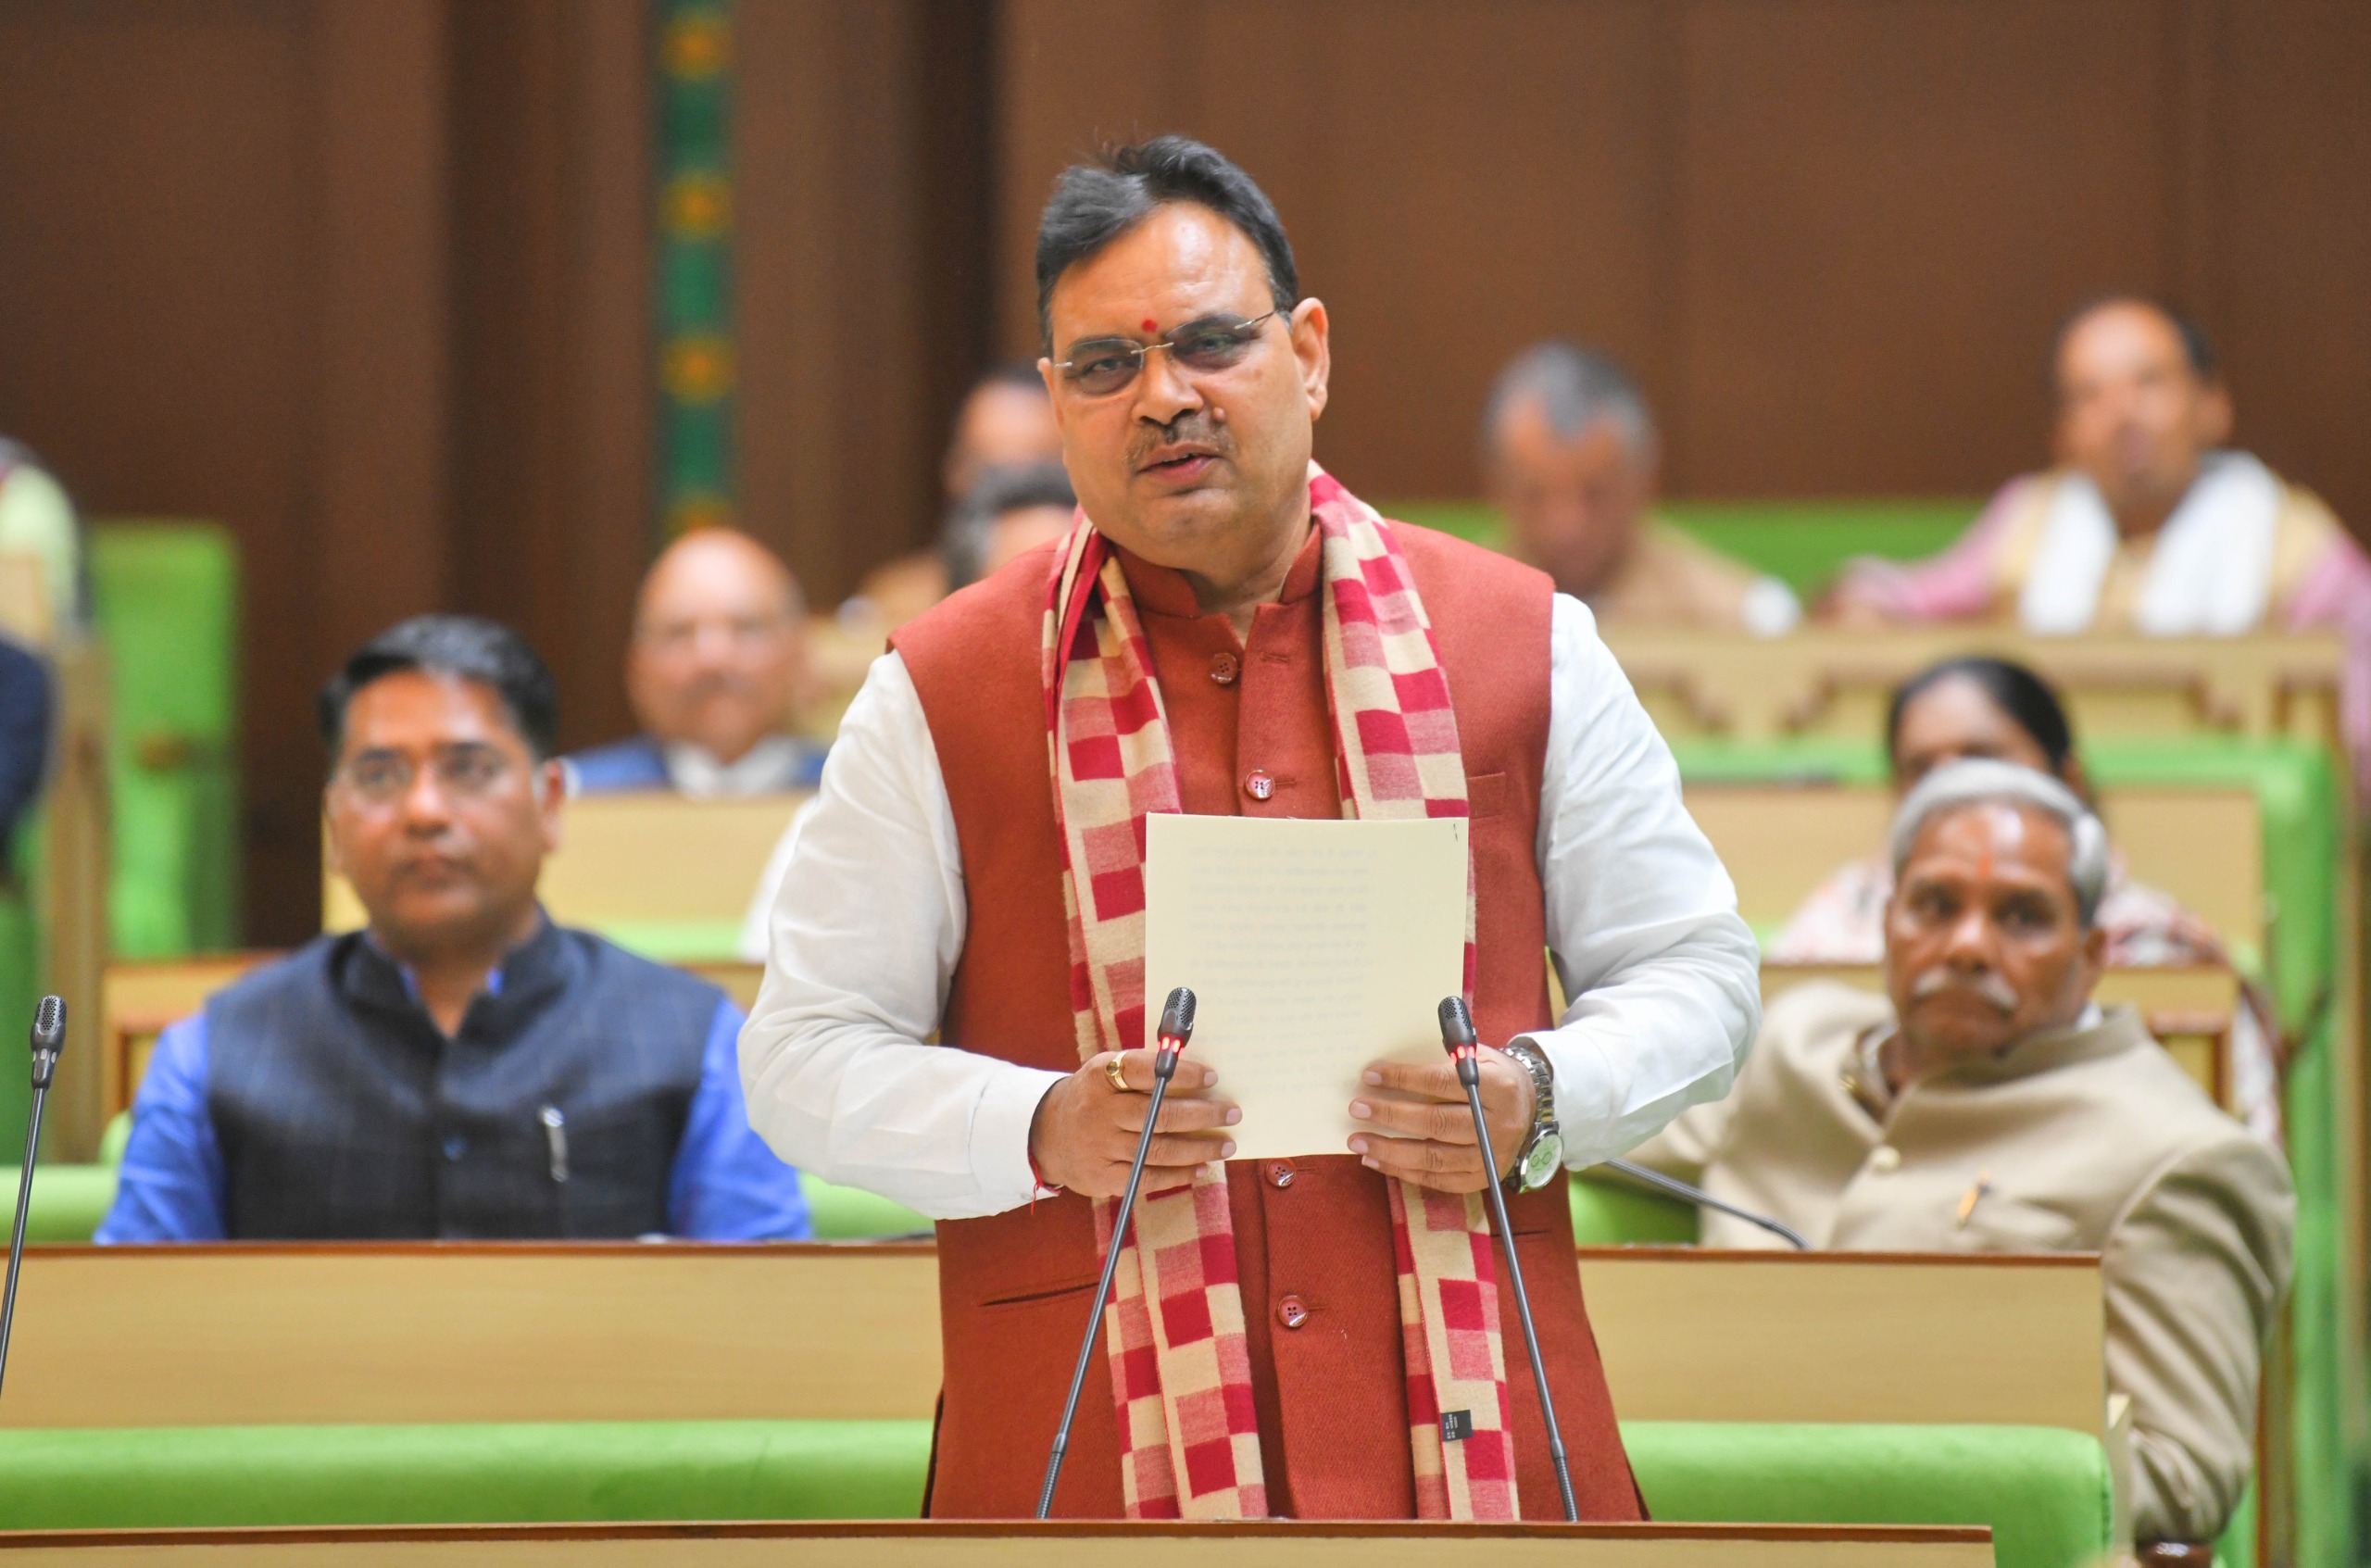 No appeasement by govt asserts CM in assembly